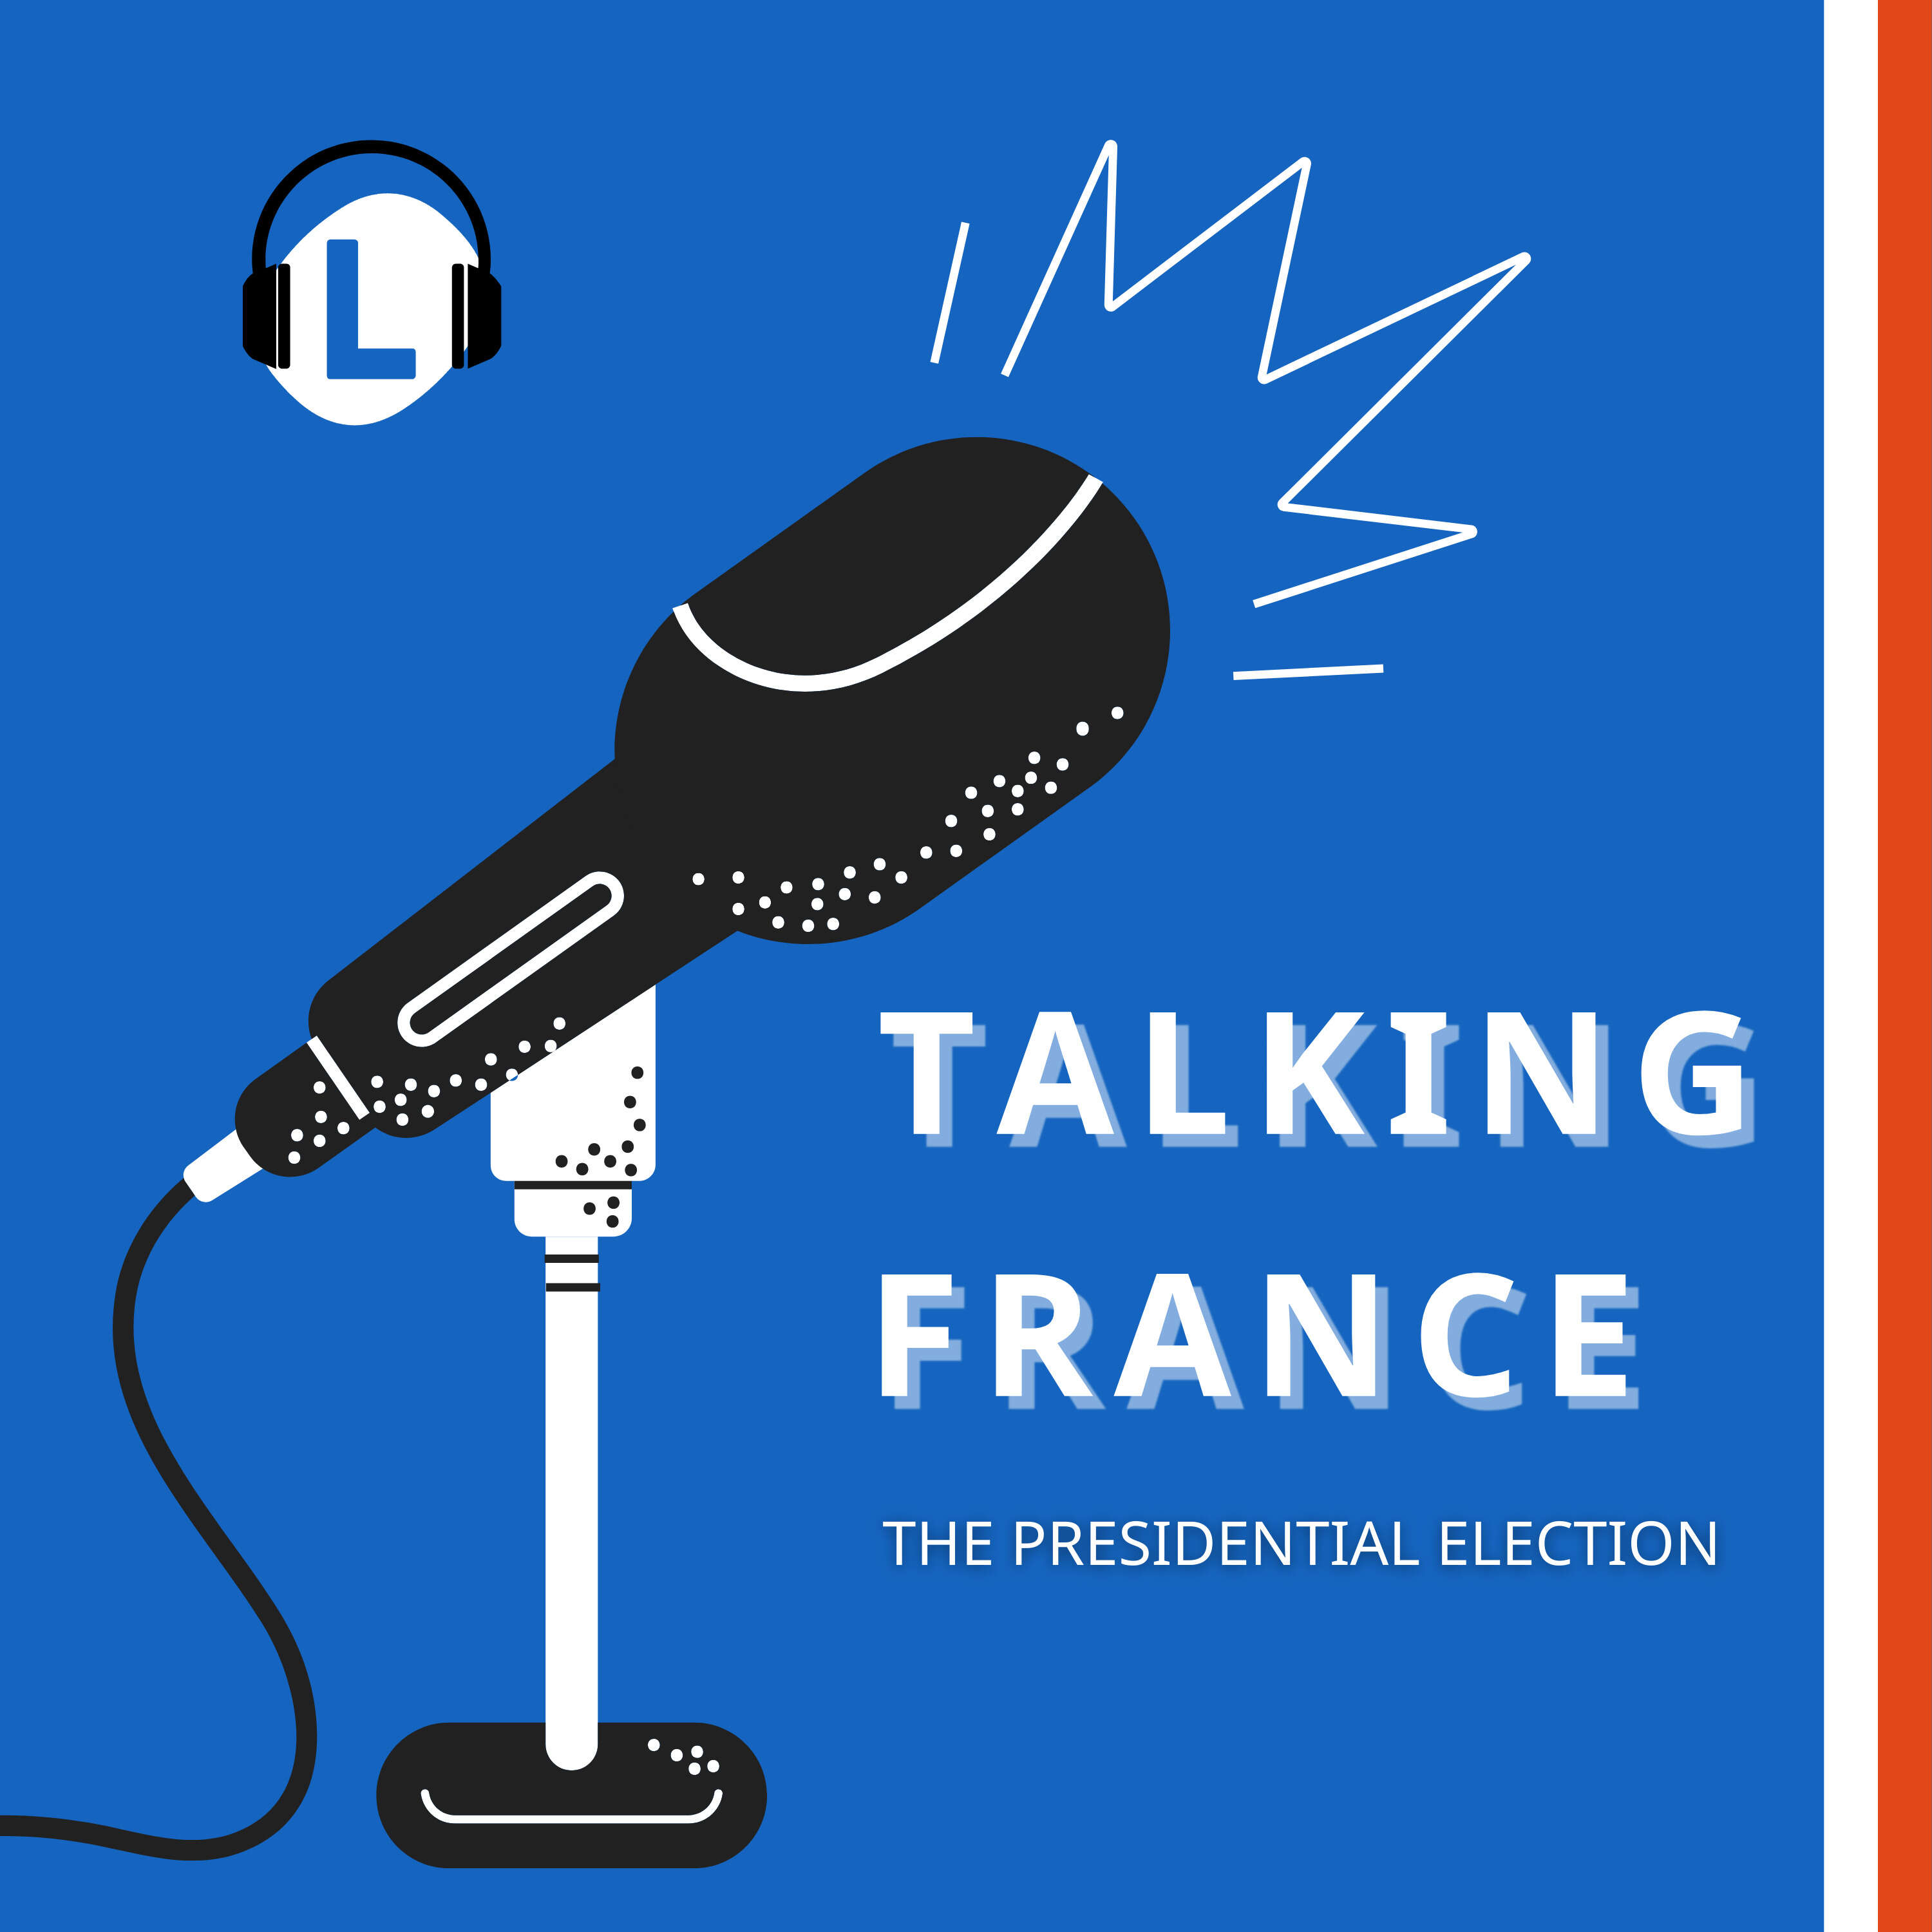 Will the French turn out to vote and what has Macron done for France?